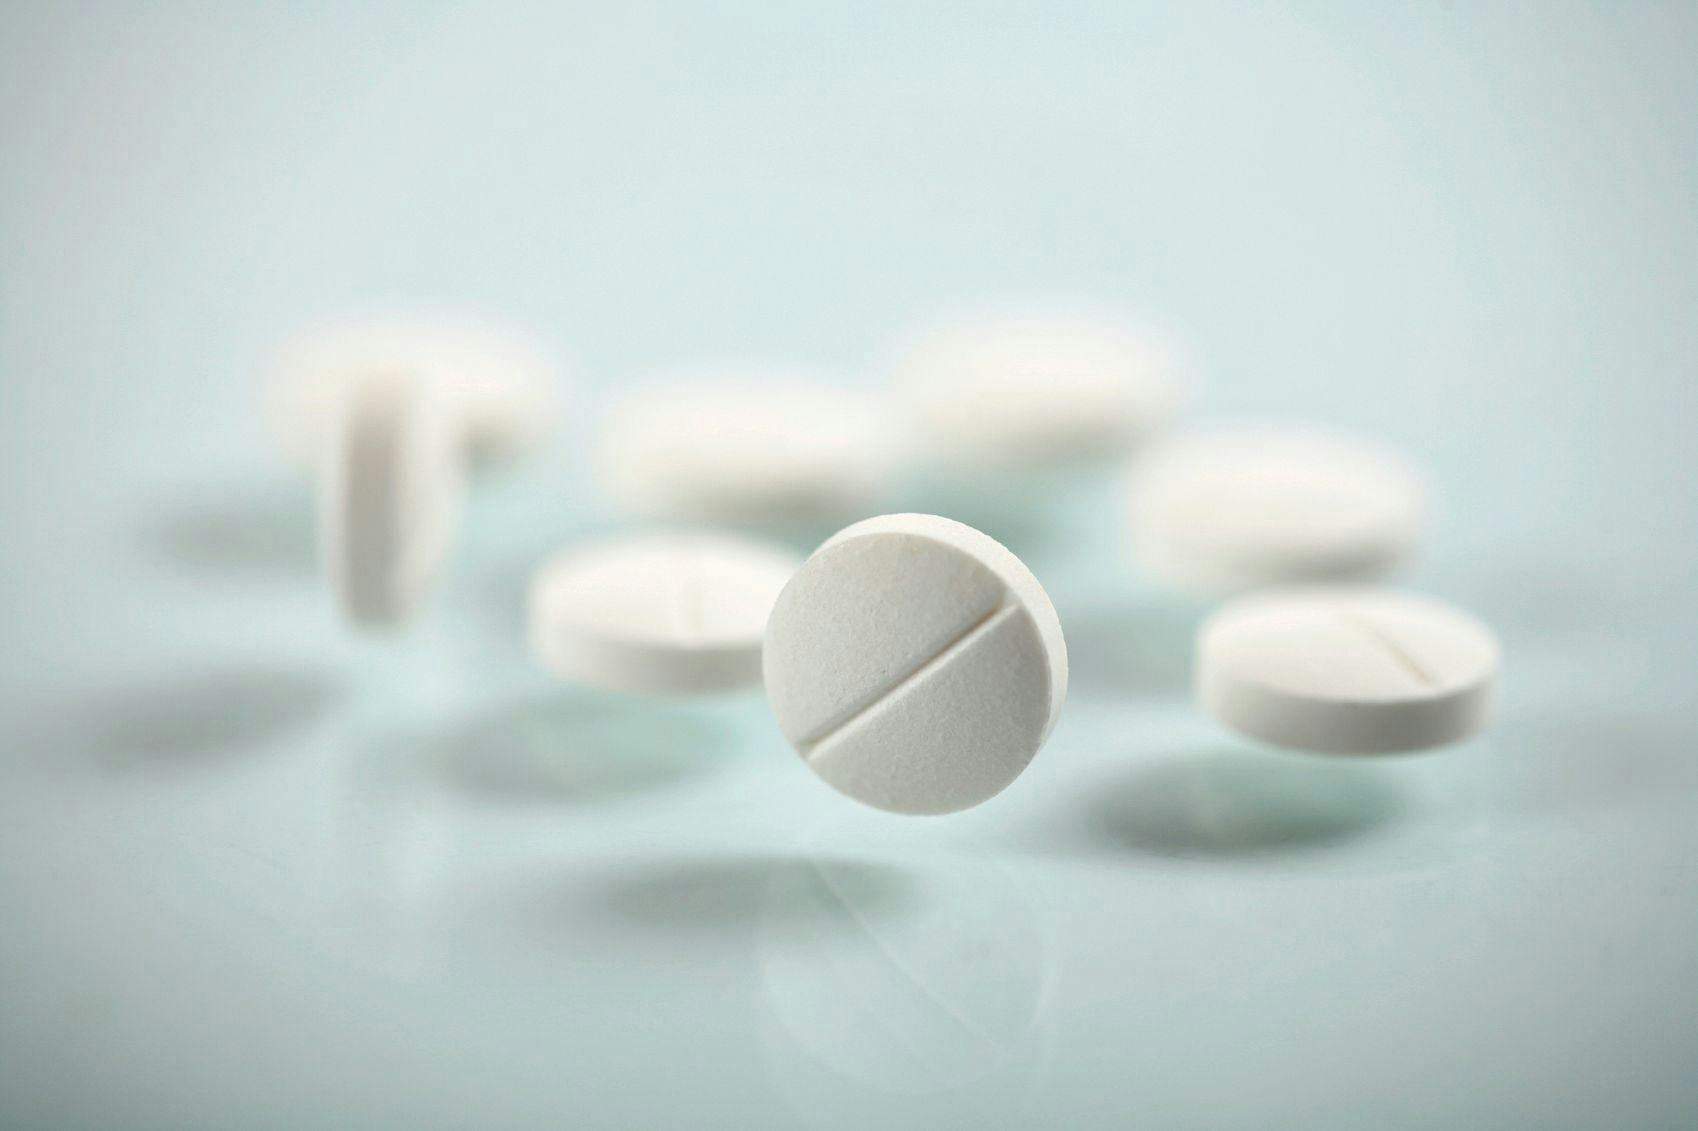 Older Adults with Diabetes Twice as Likely to Use Aspirin for Prevention